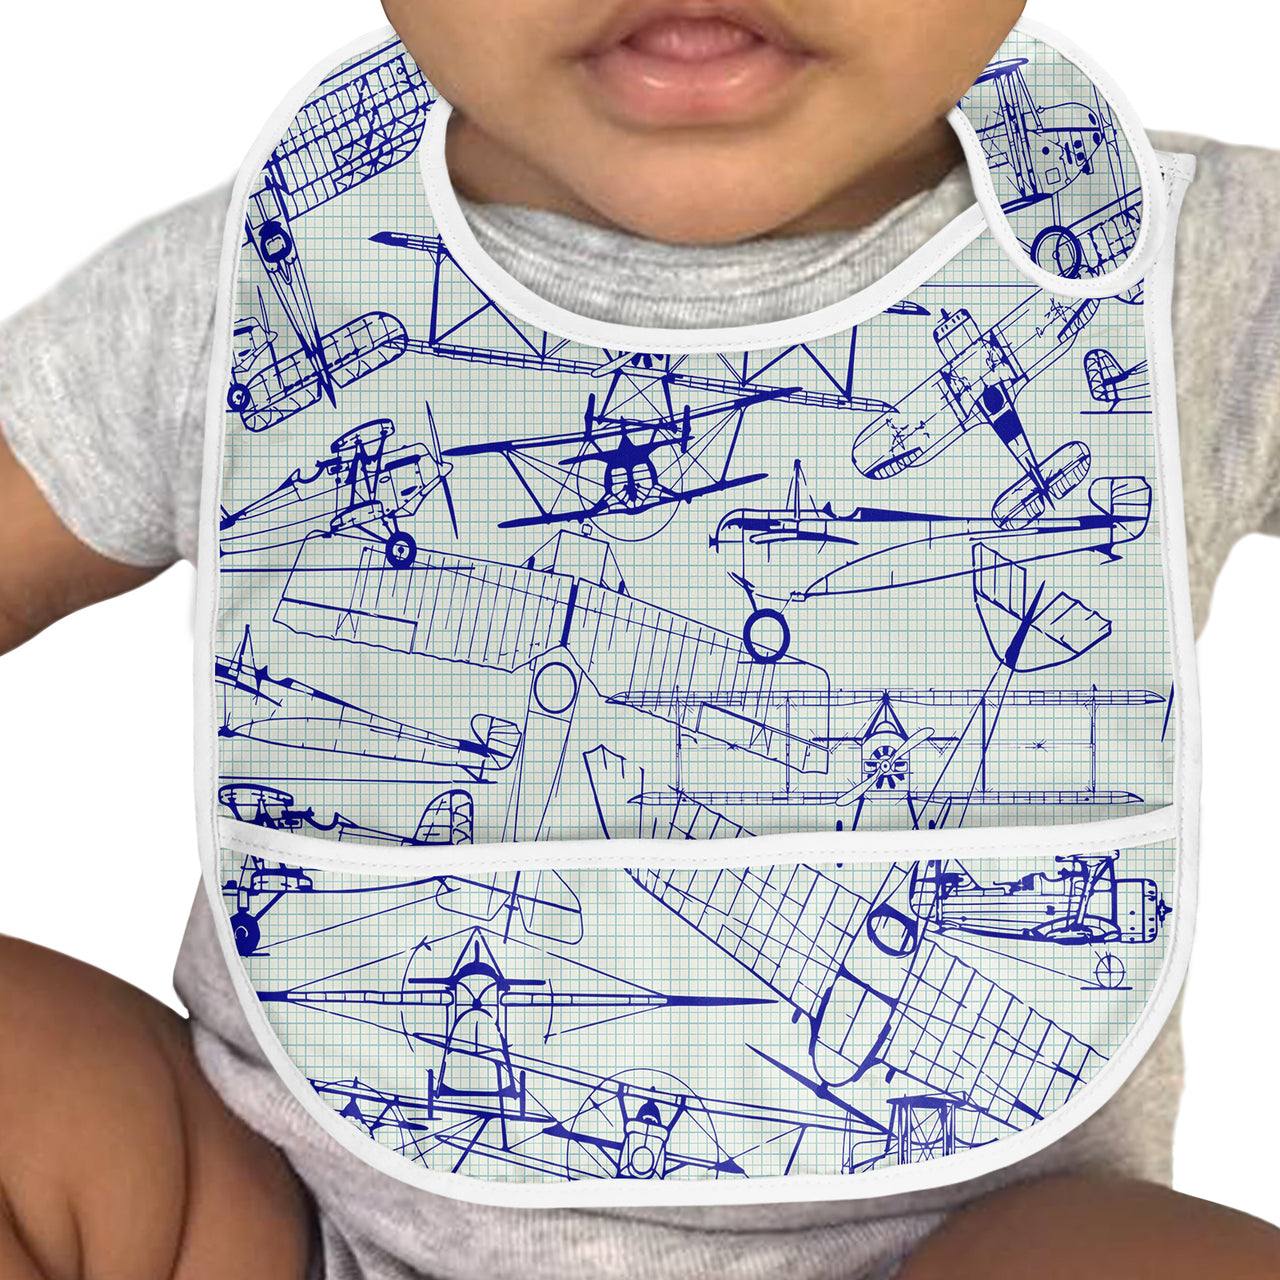 Amazing Drawings of Old Aircrafts Designed Baby Bib